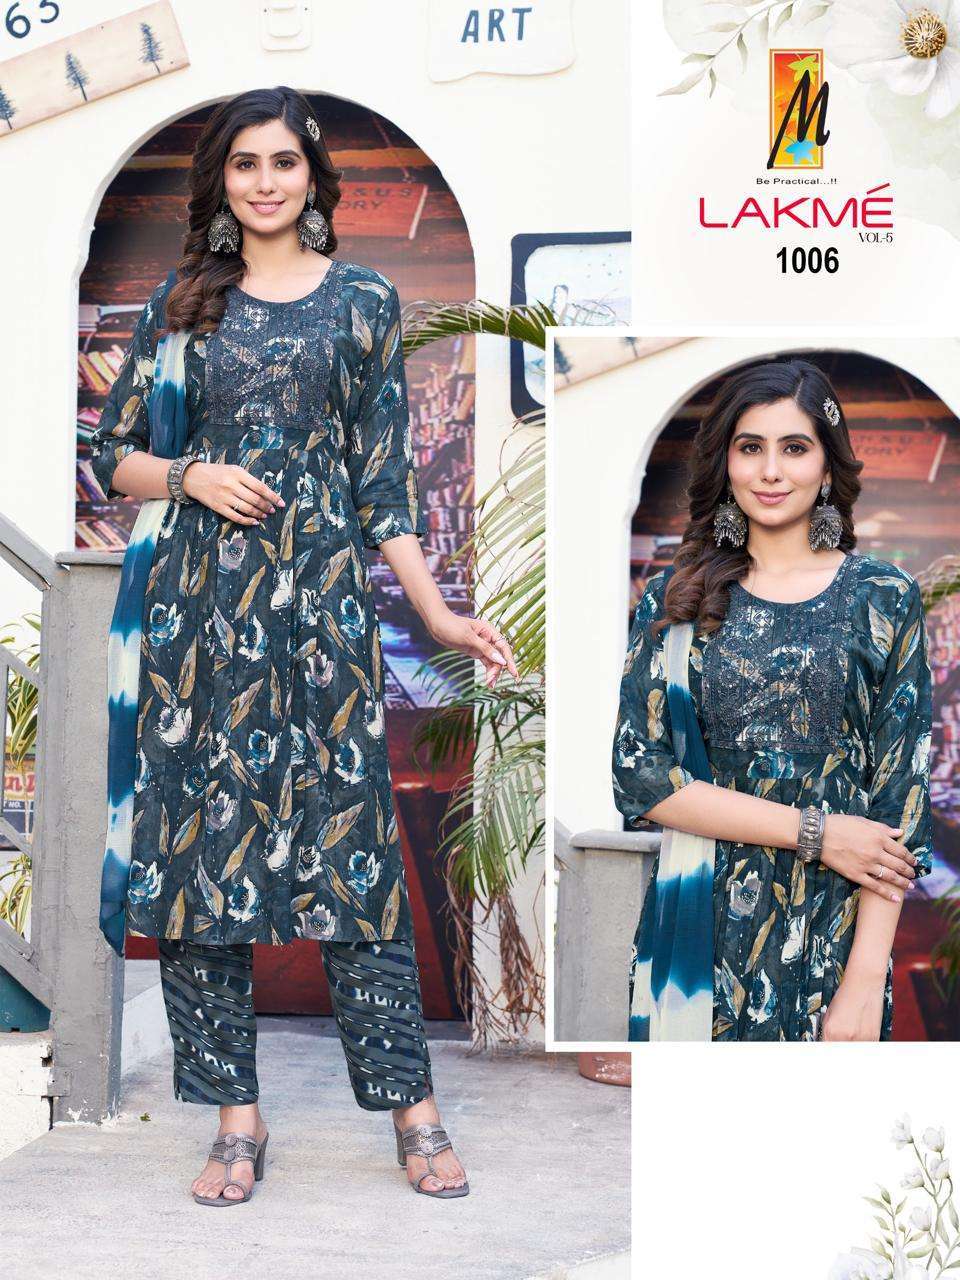 MASTER LAKME NAYRA CUT Wholesale kurtis from Surat for boutique owners